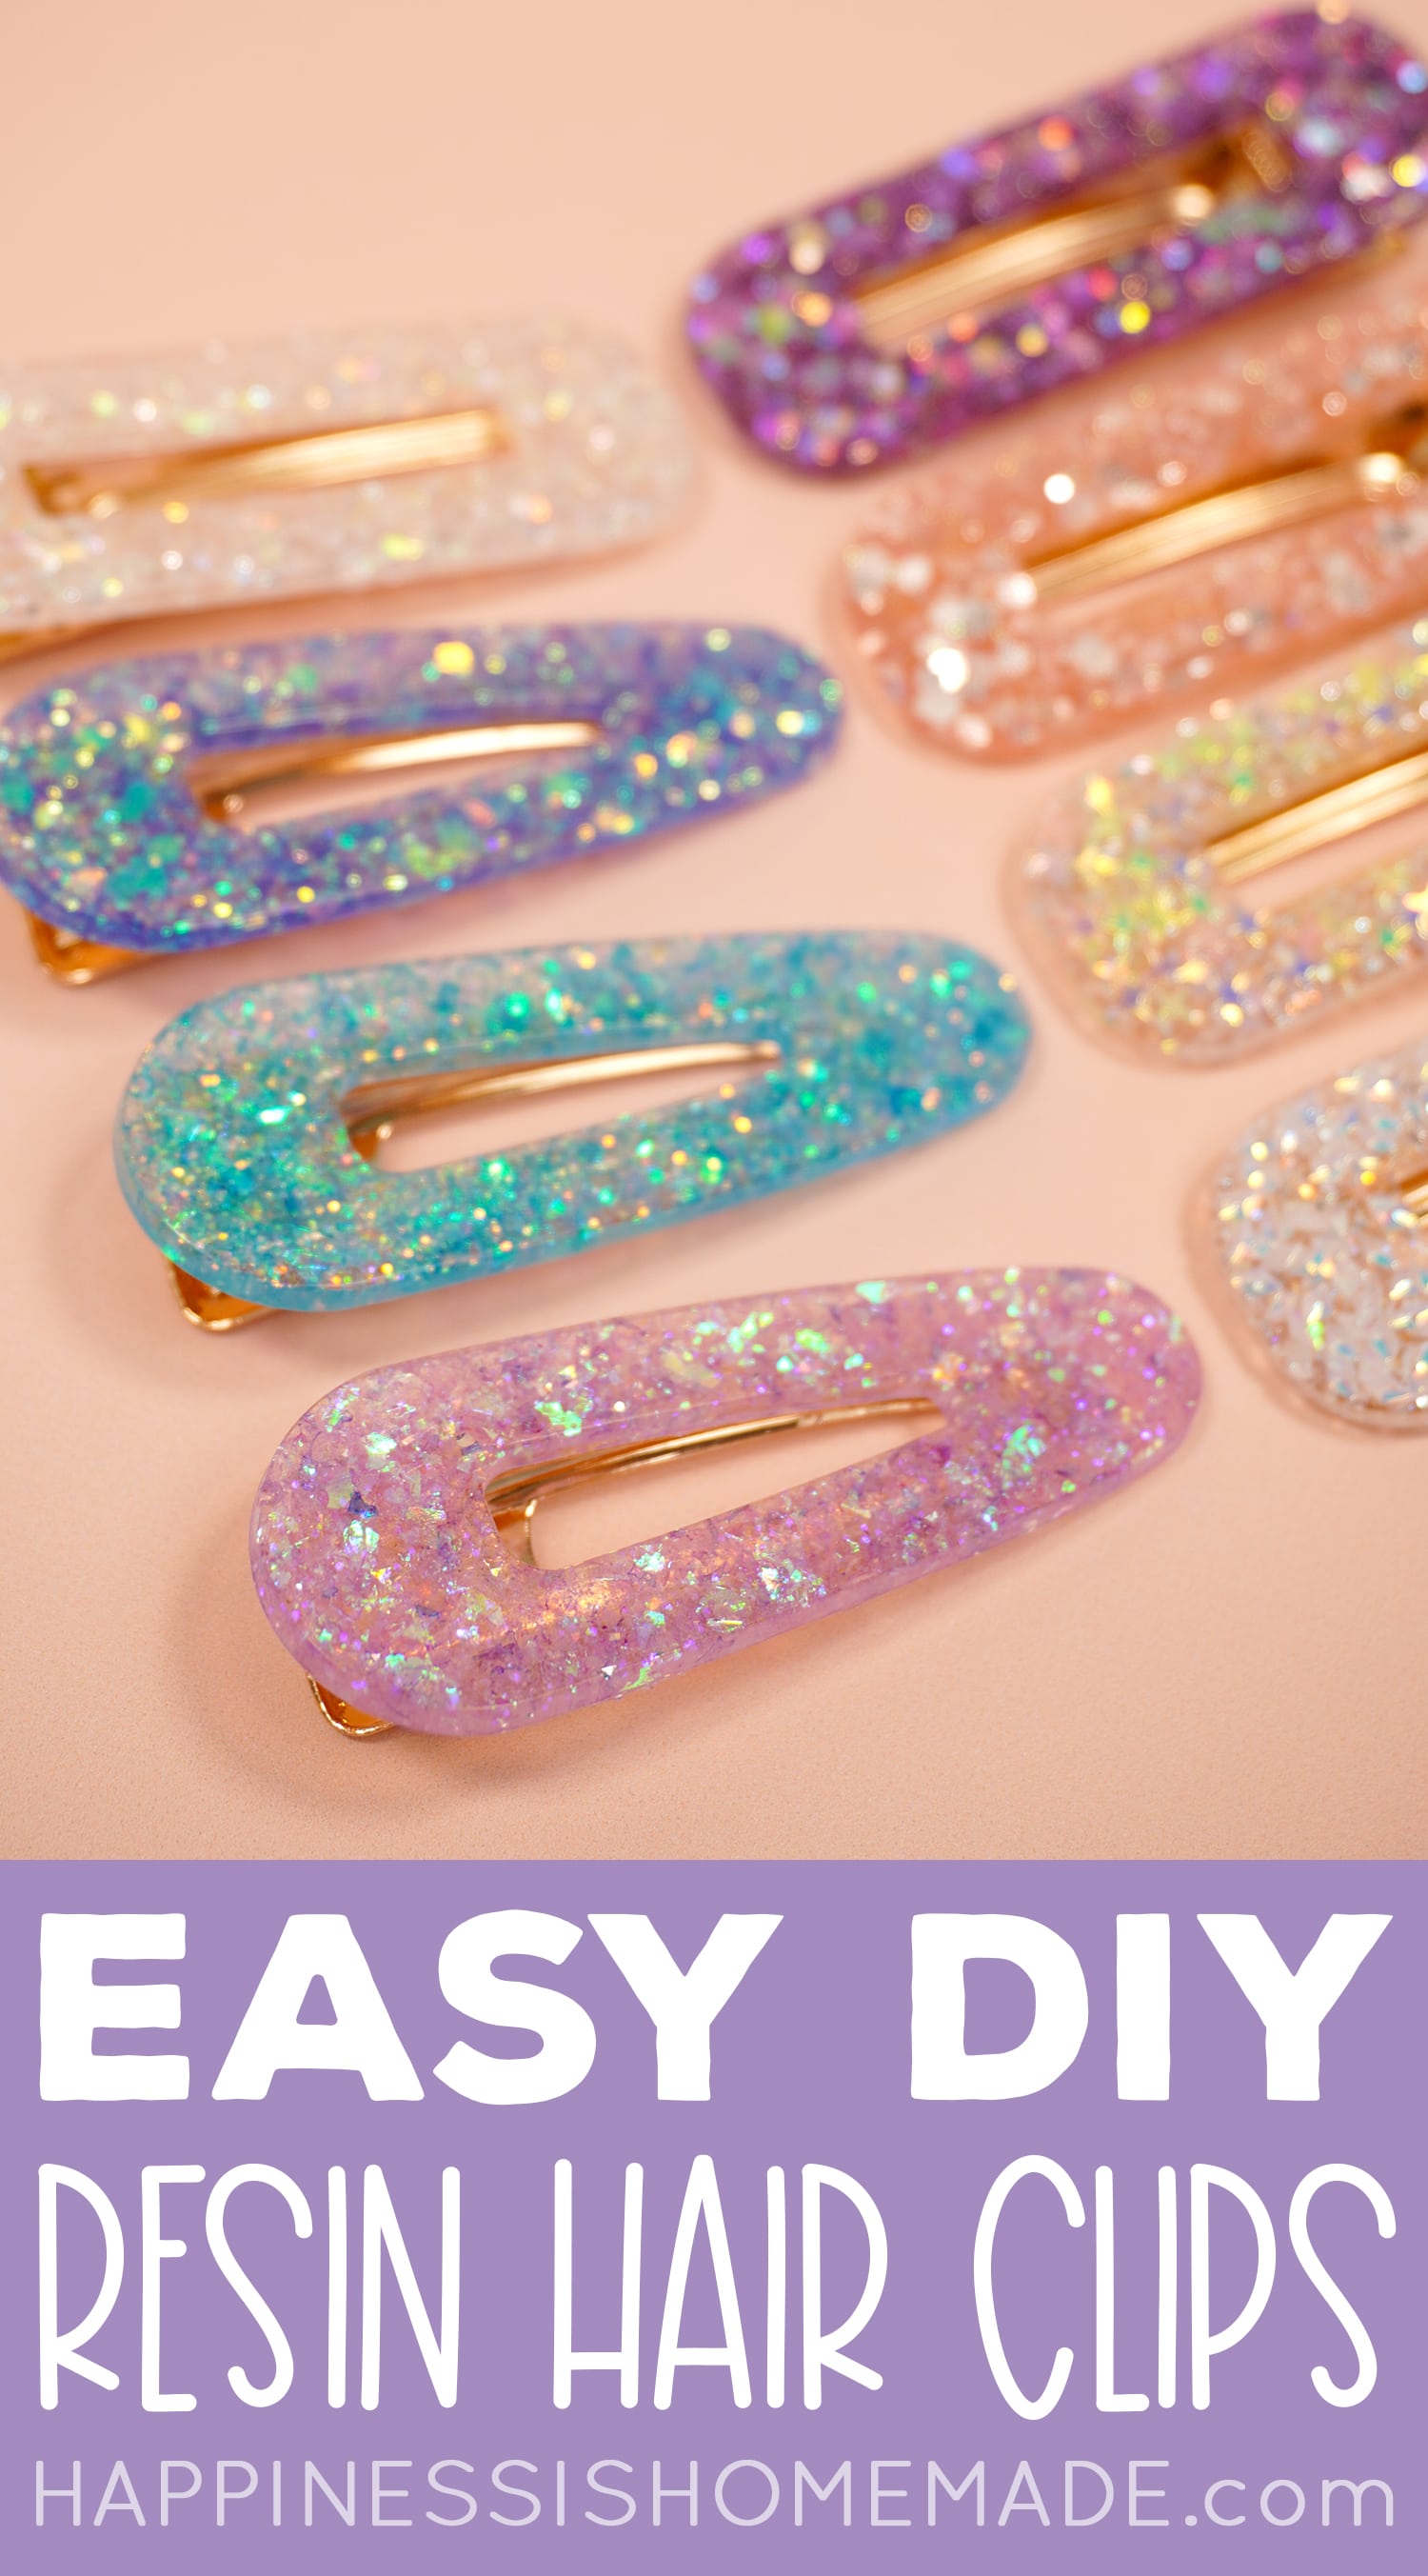 DIY Hair Clips - The Crafted Life